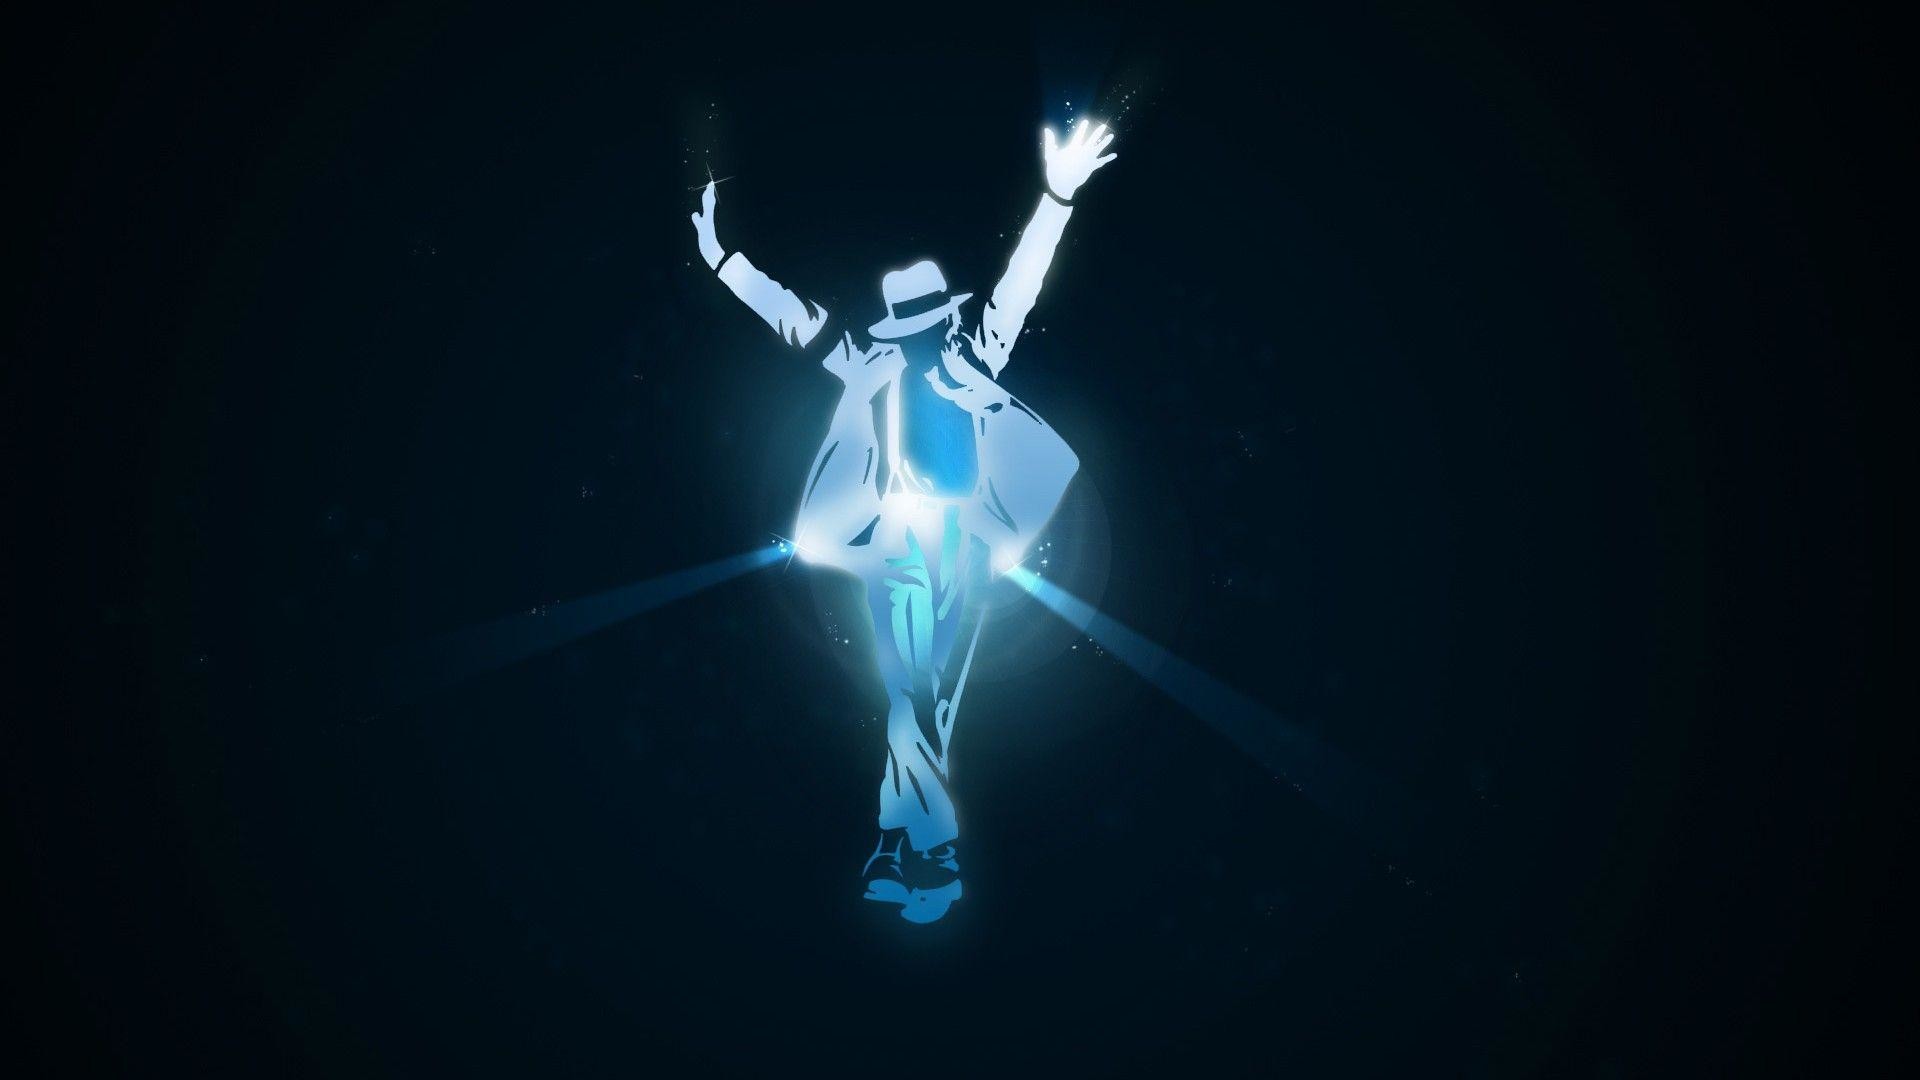 1920x1080 Download The King of Pop Michael Jackson Wallpaper Free By .